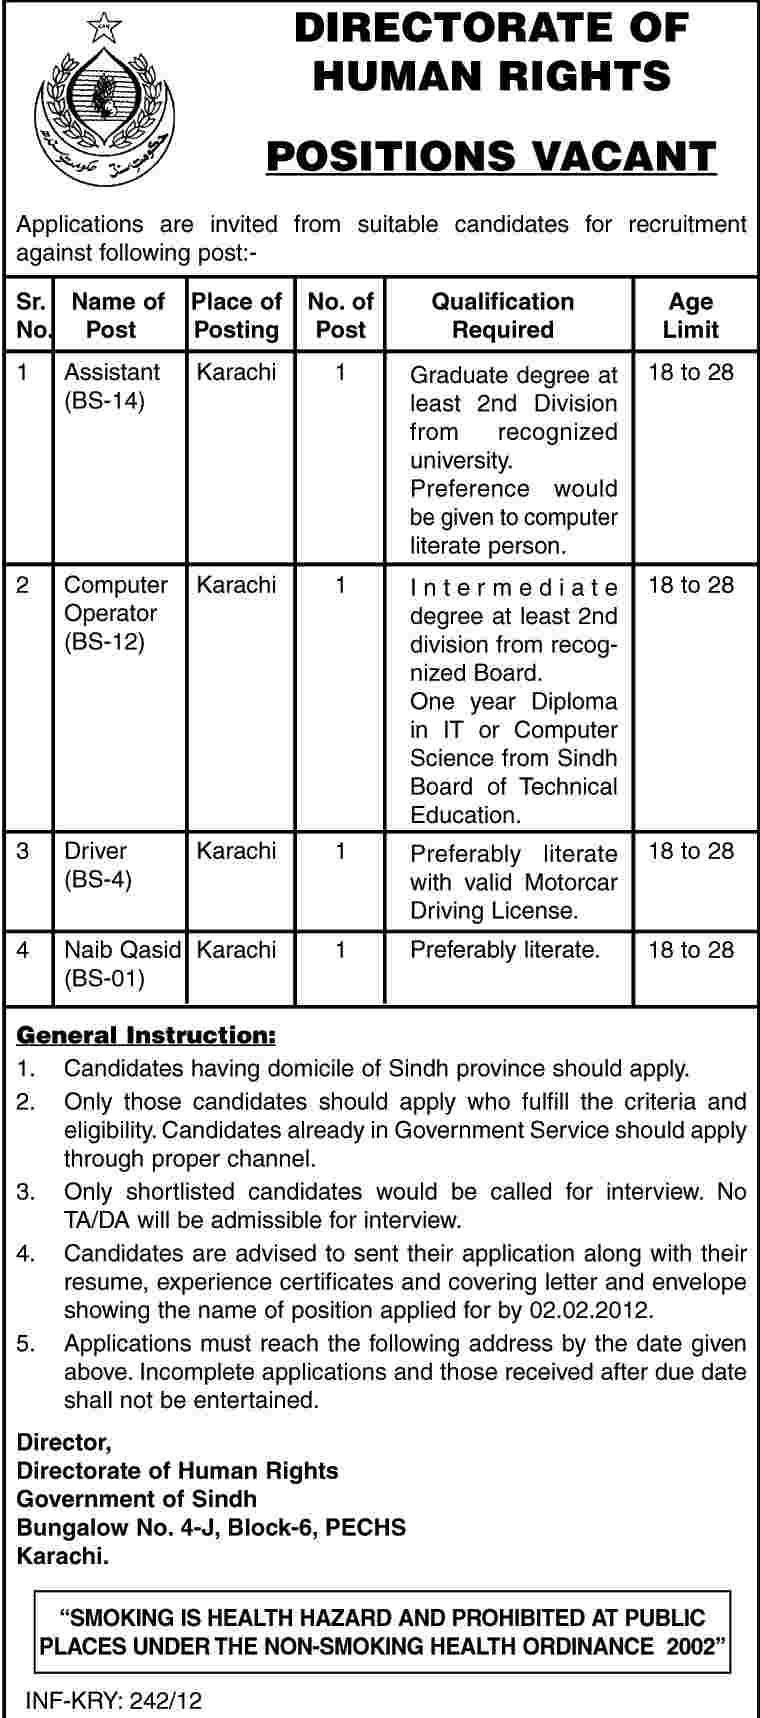 Directorate of Human Rights Jobs Opportunity